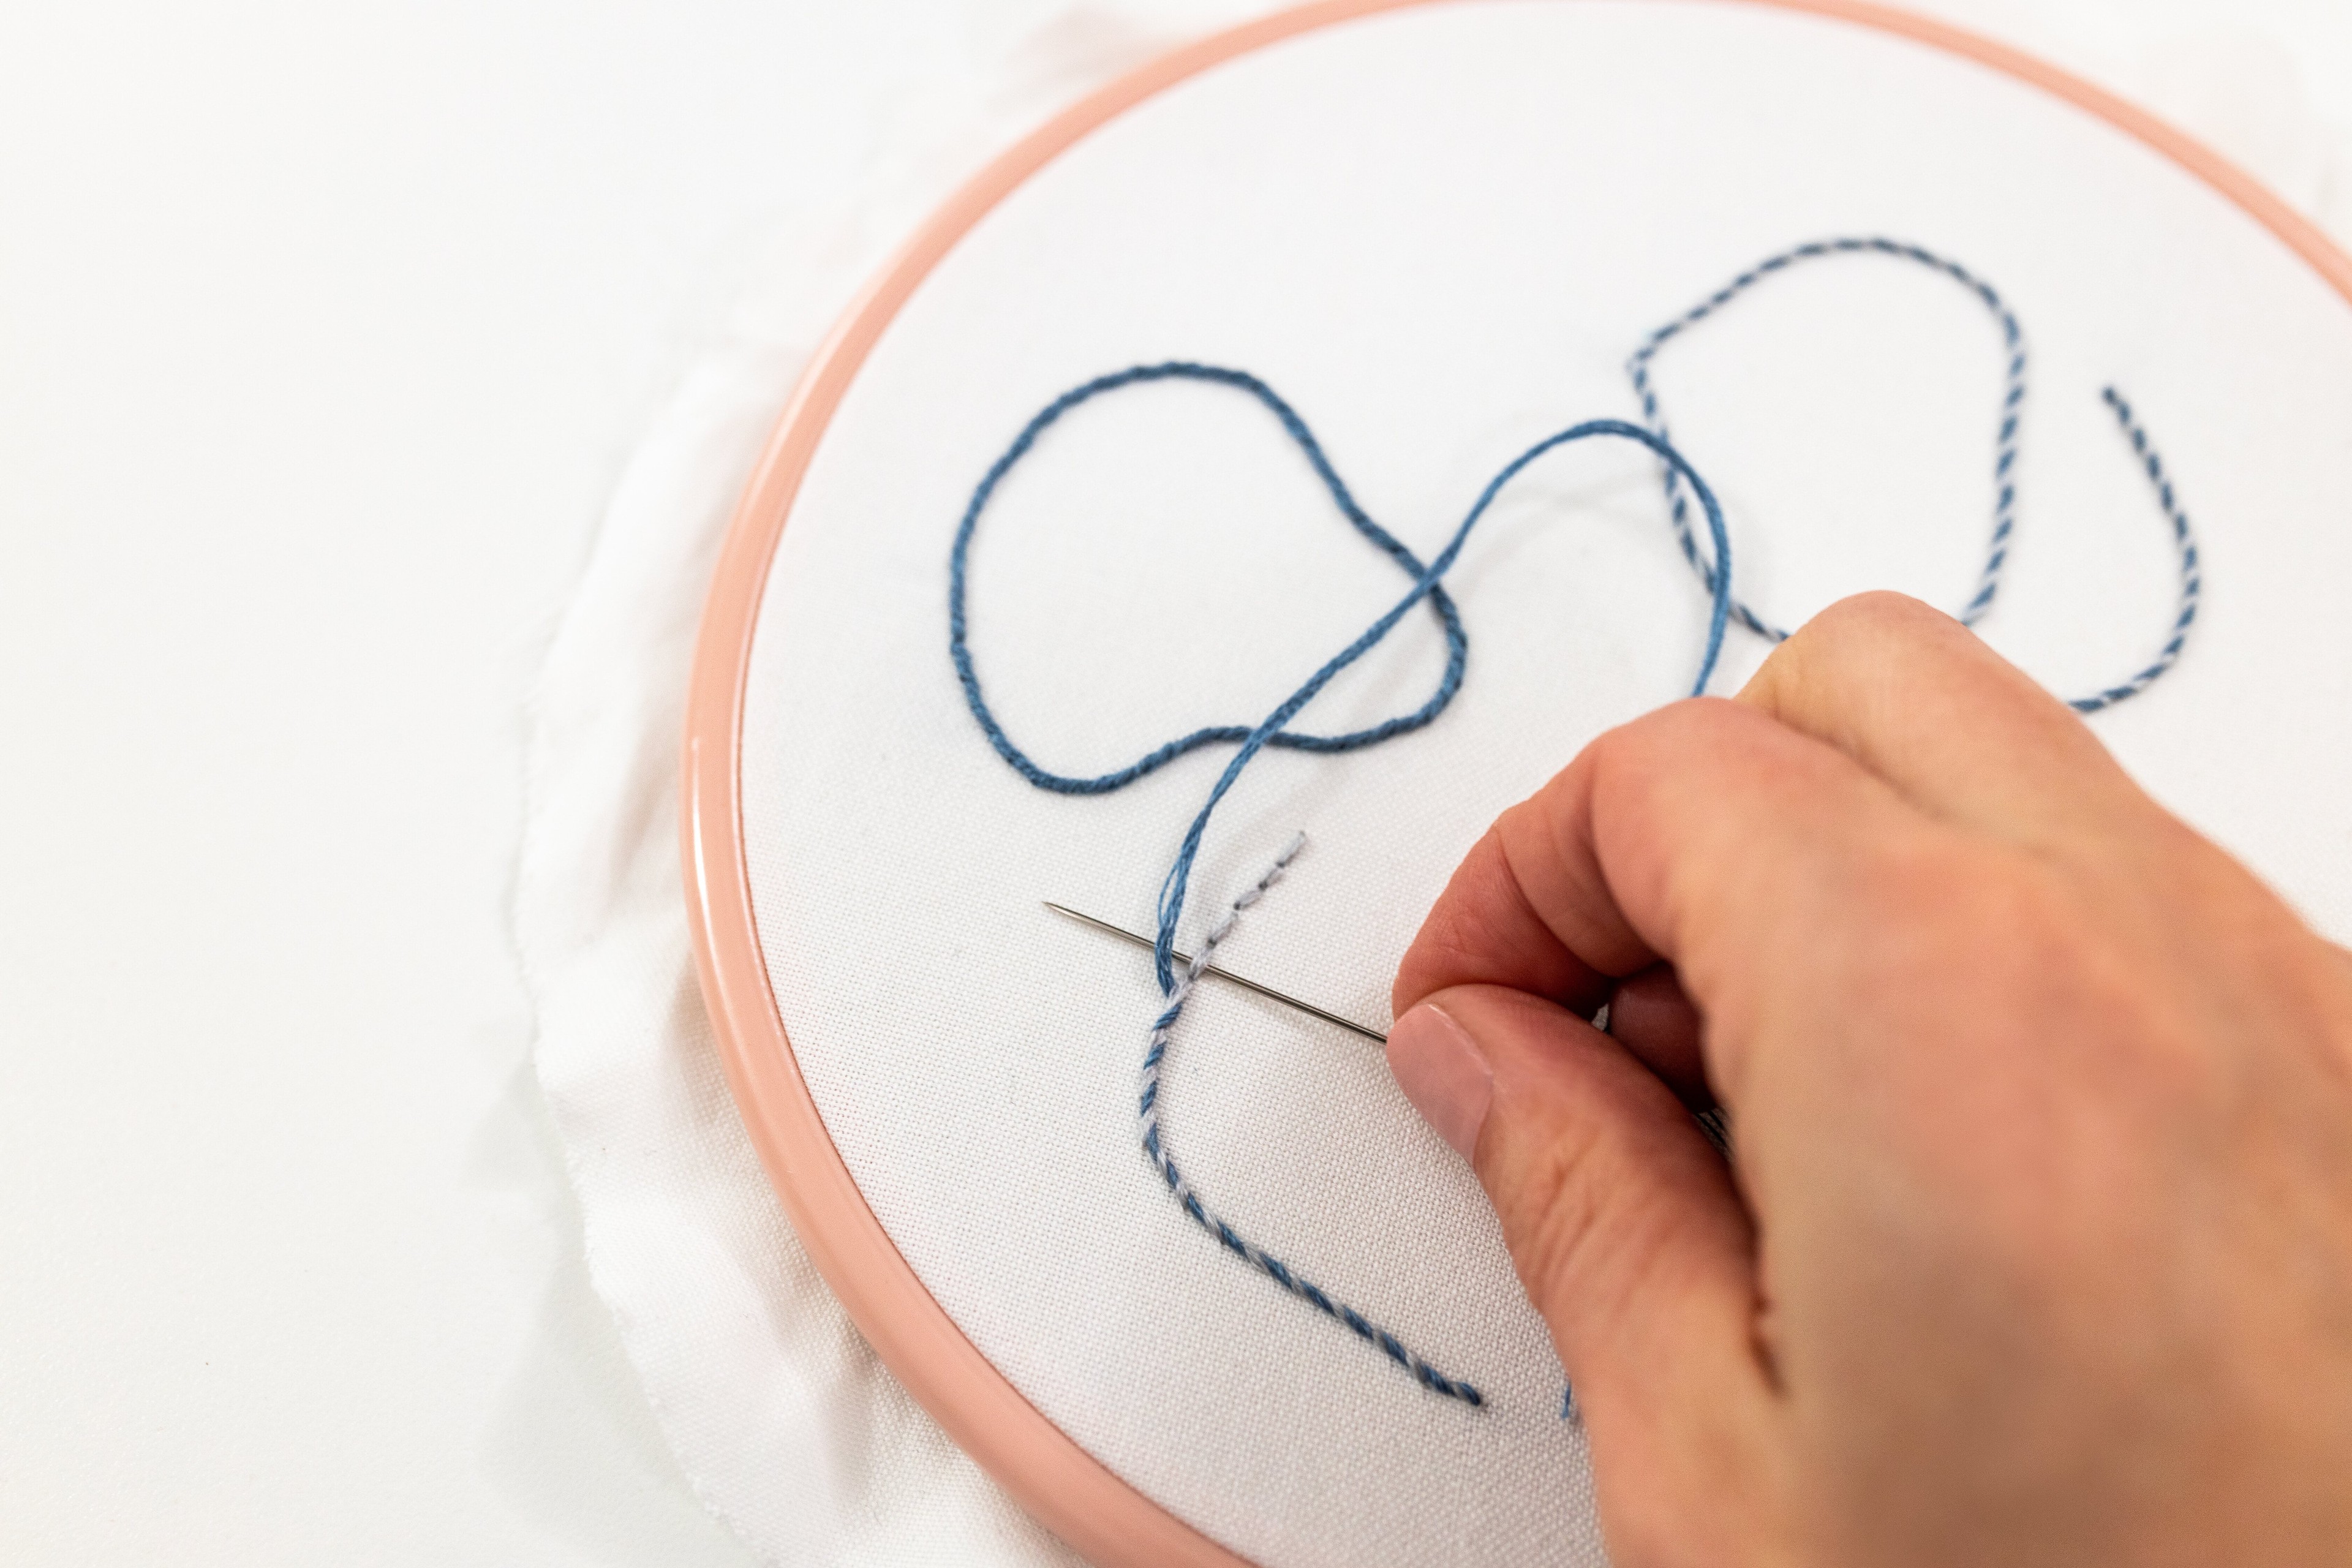 A blue thread had been stitched under a curved shape.